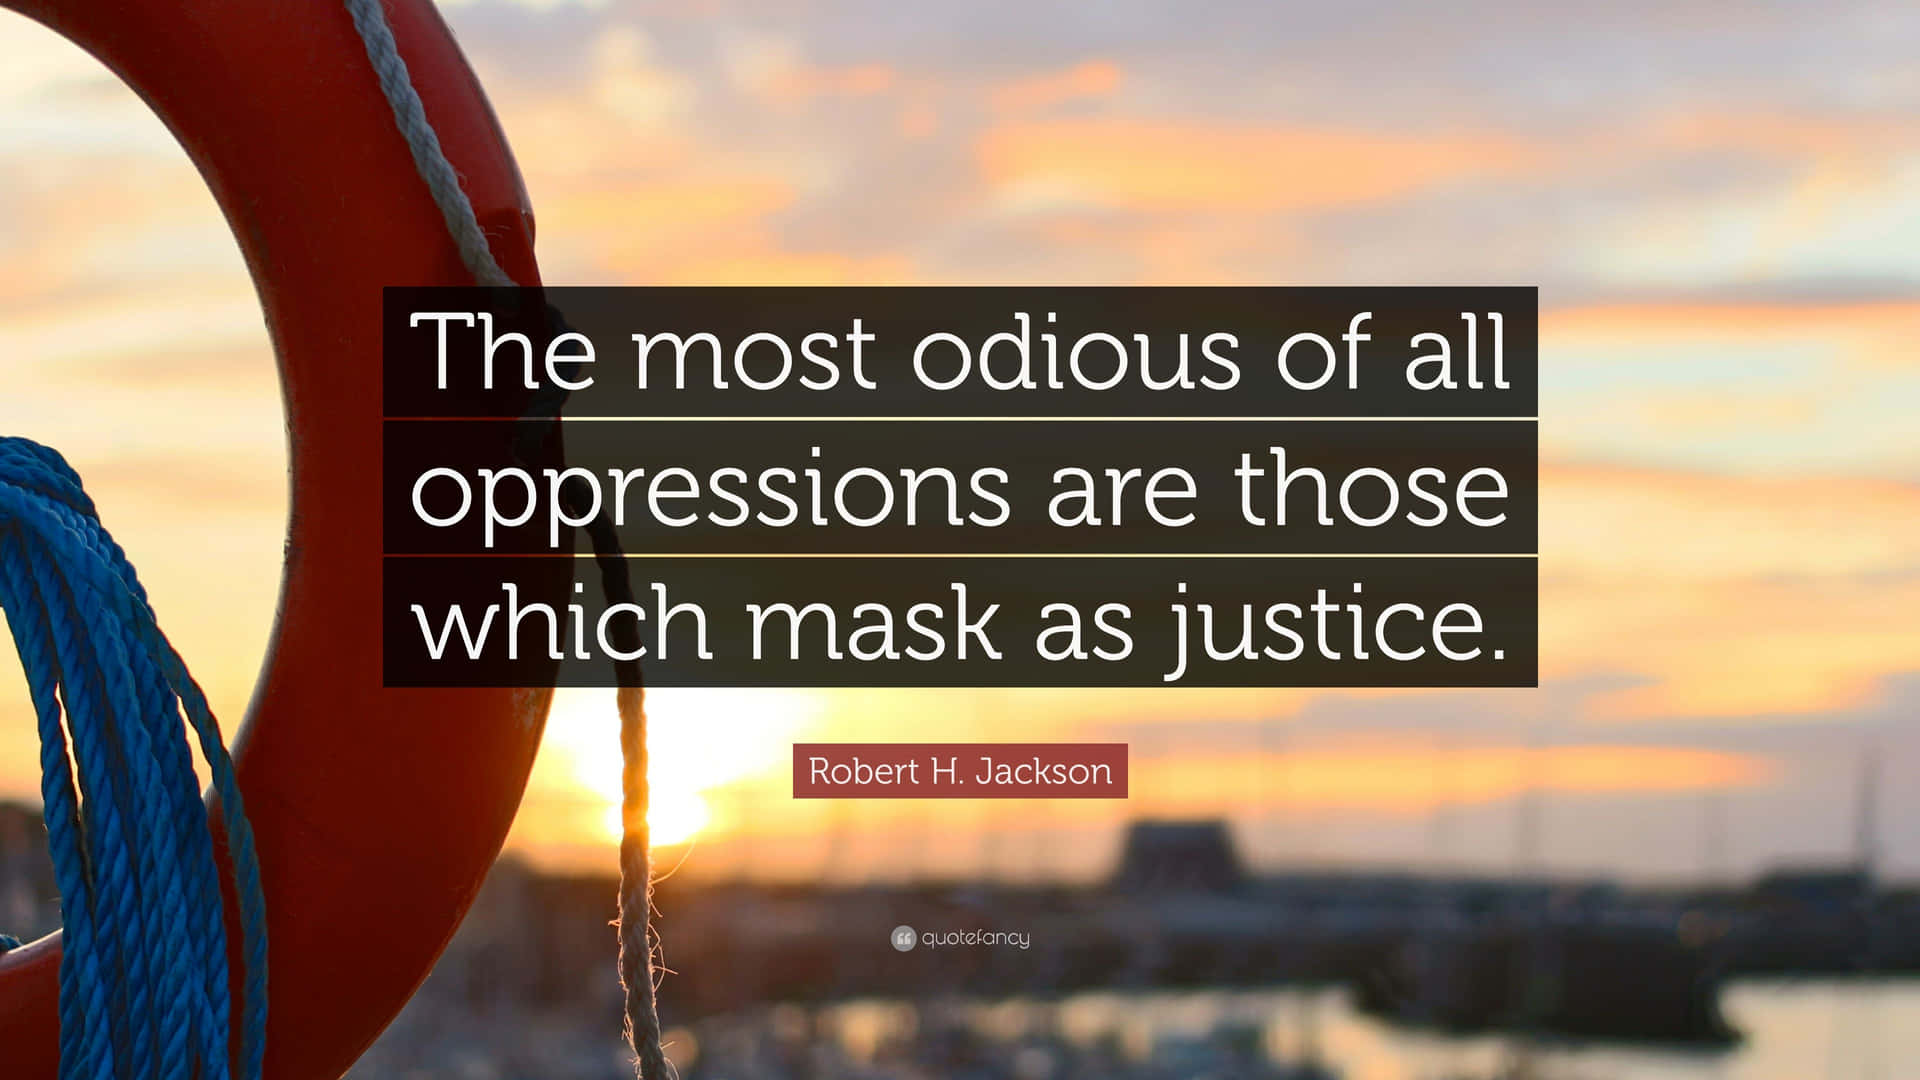 Odious Opressions Justice Quote Wallpaper